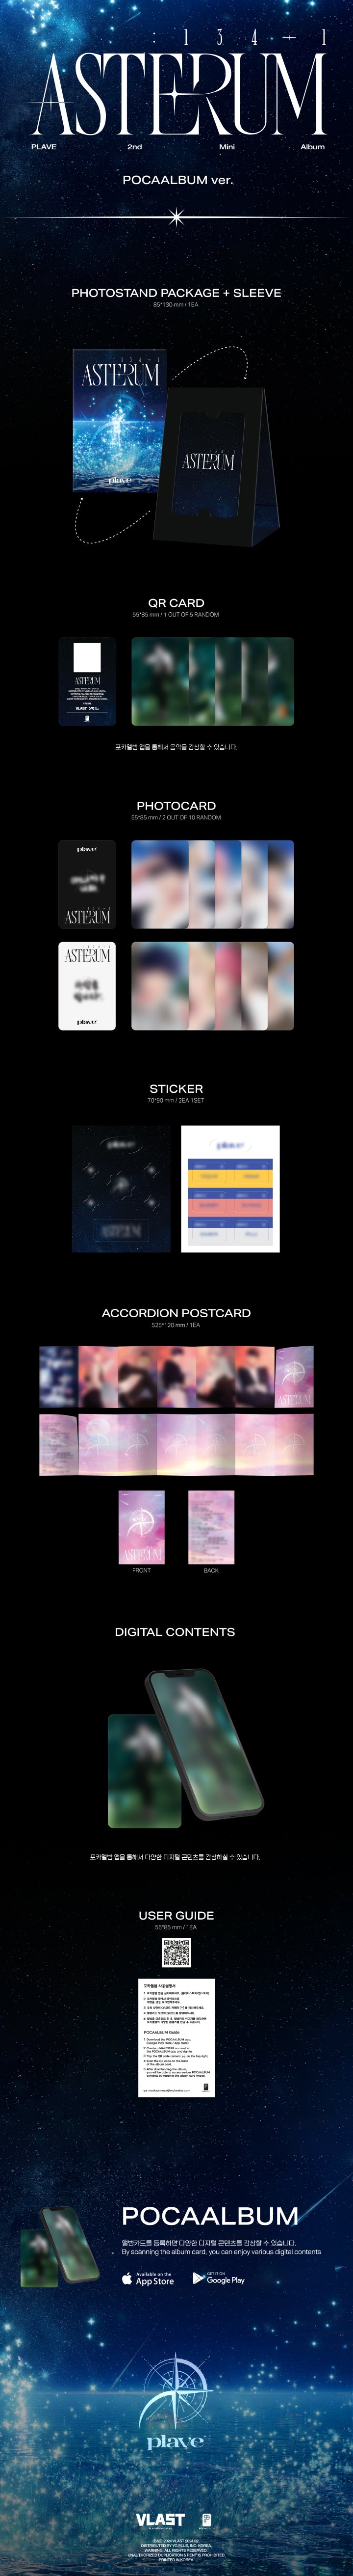 1 QR Card
2 Photo Cards (random out of 10 types)
2 Stickers
1 Accordion Postcard